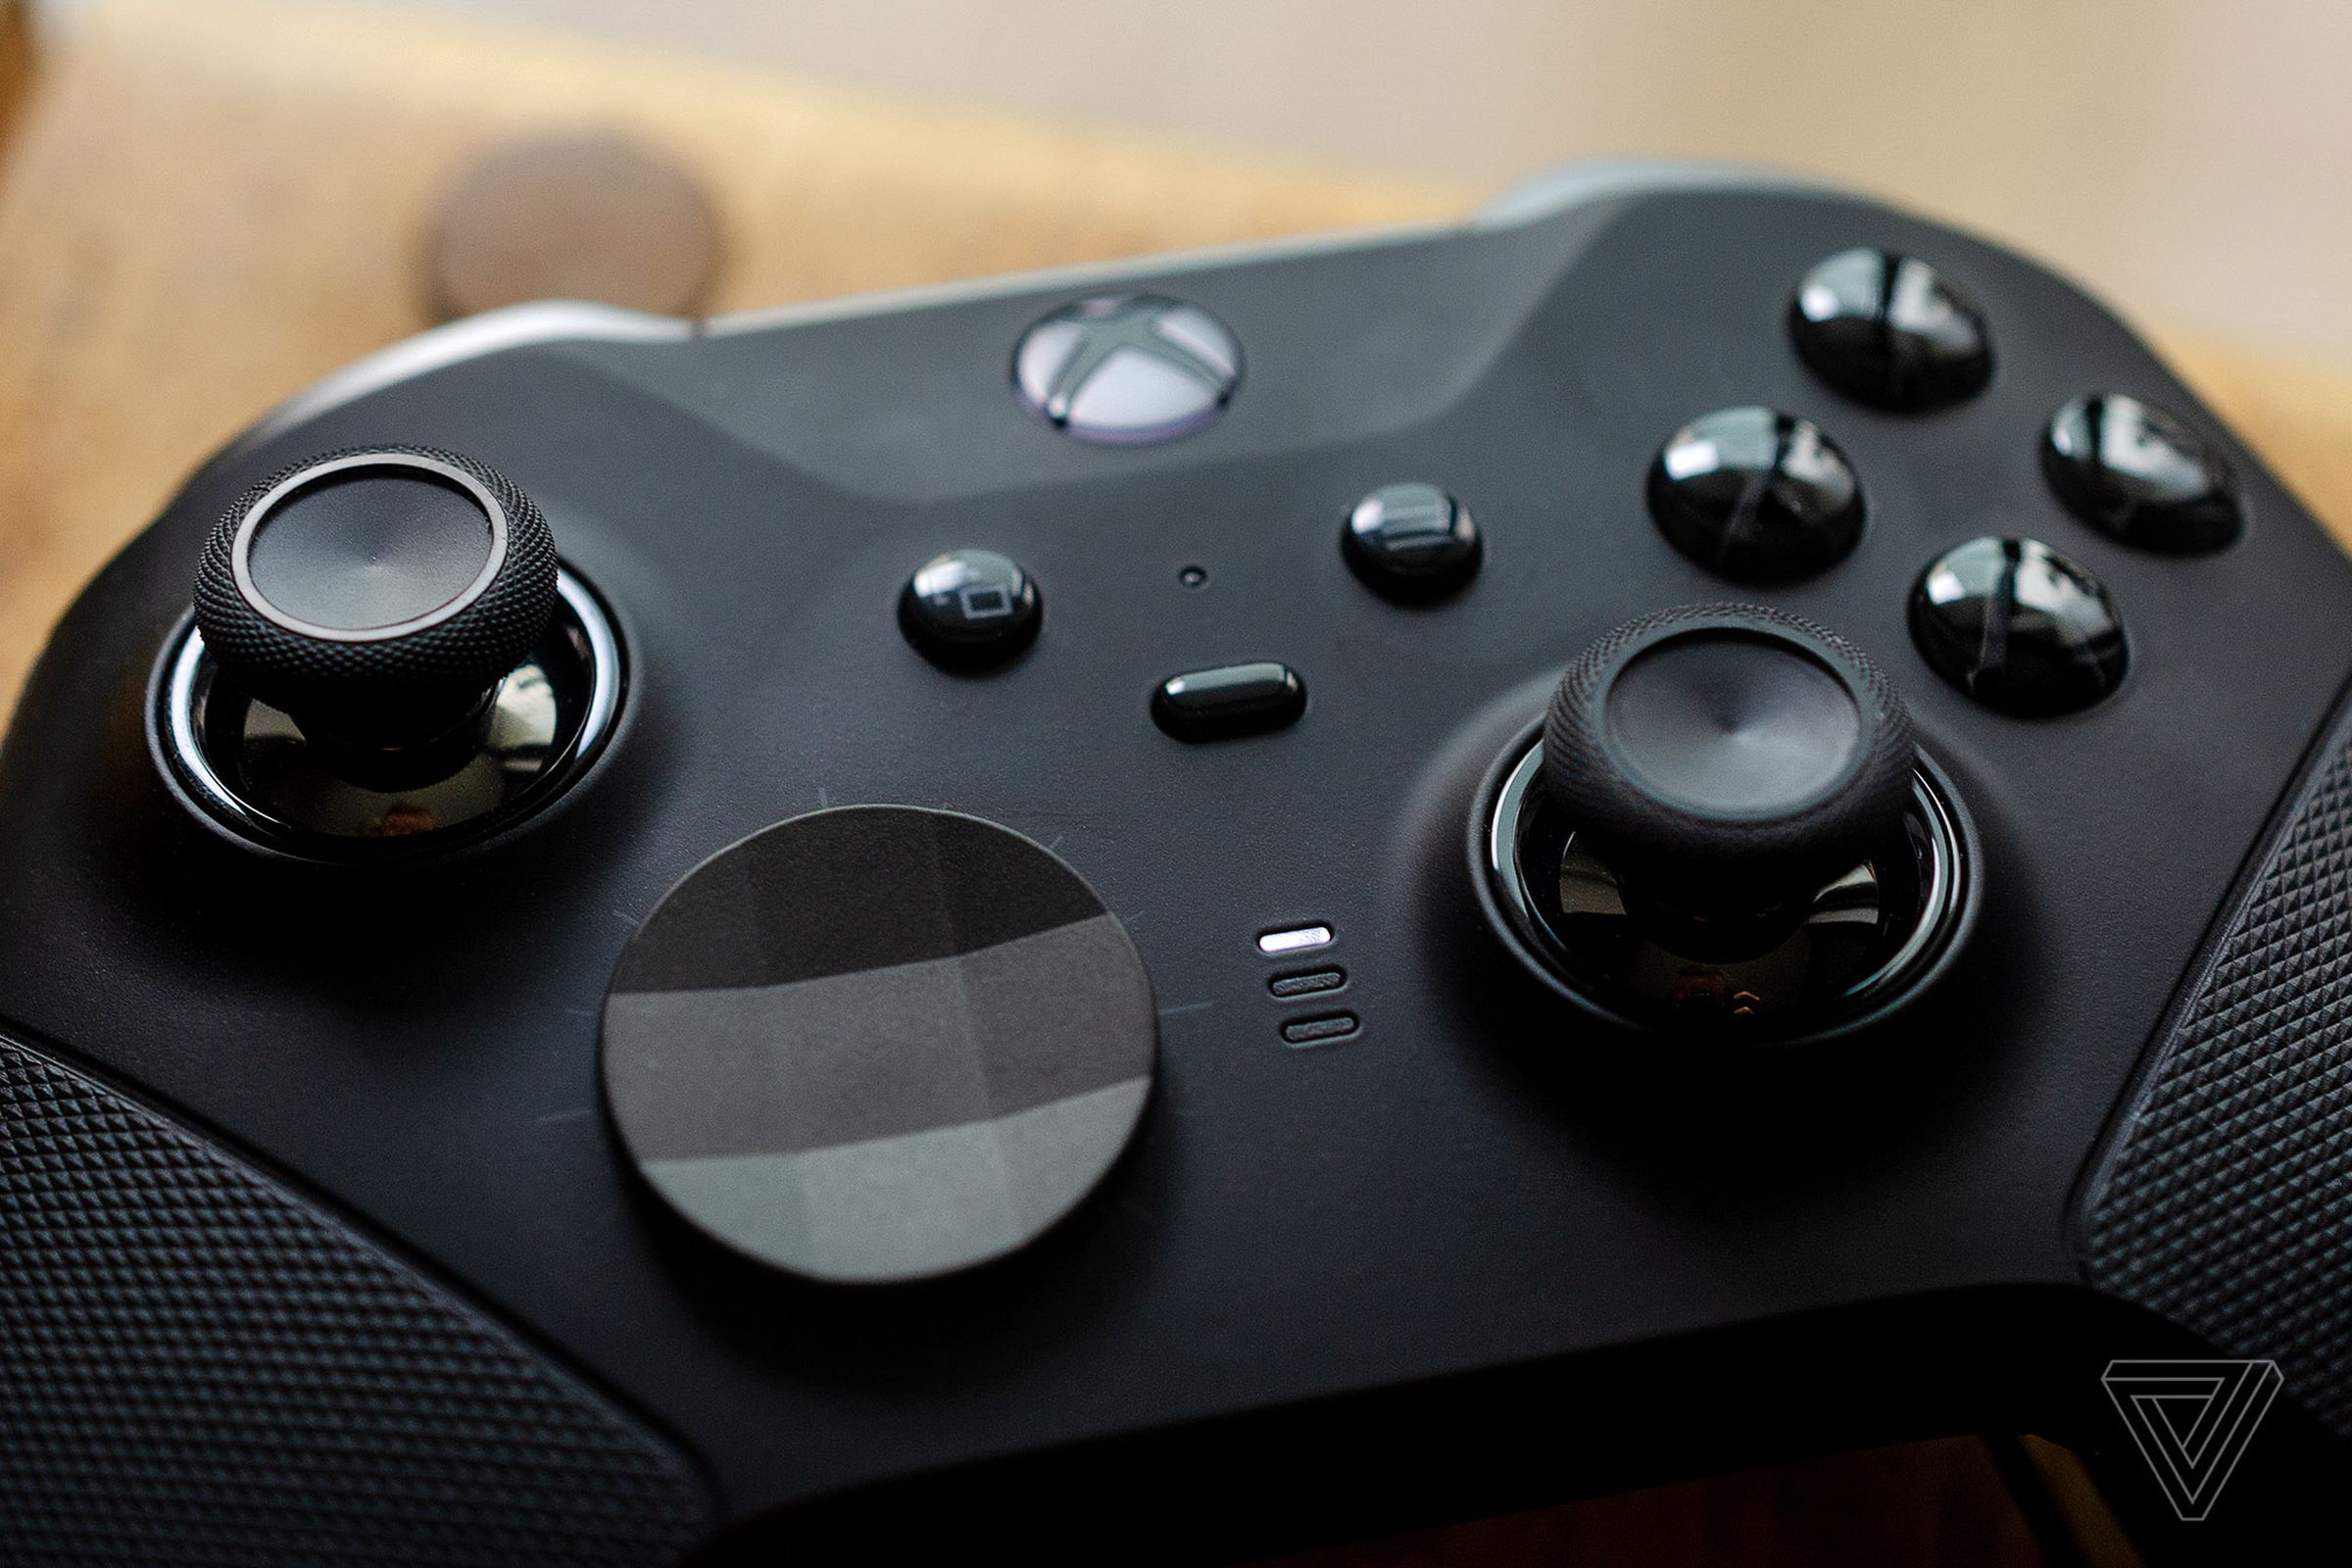 A photograph  showing the Elite 2 controller